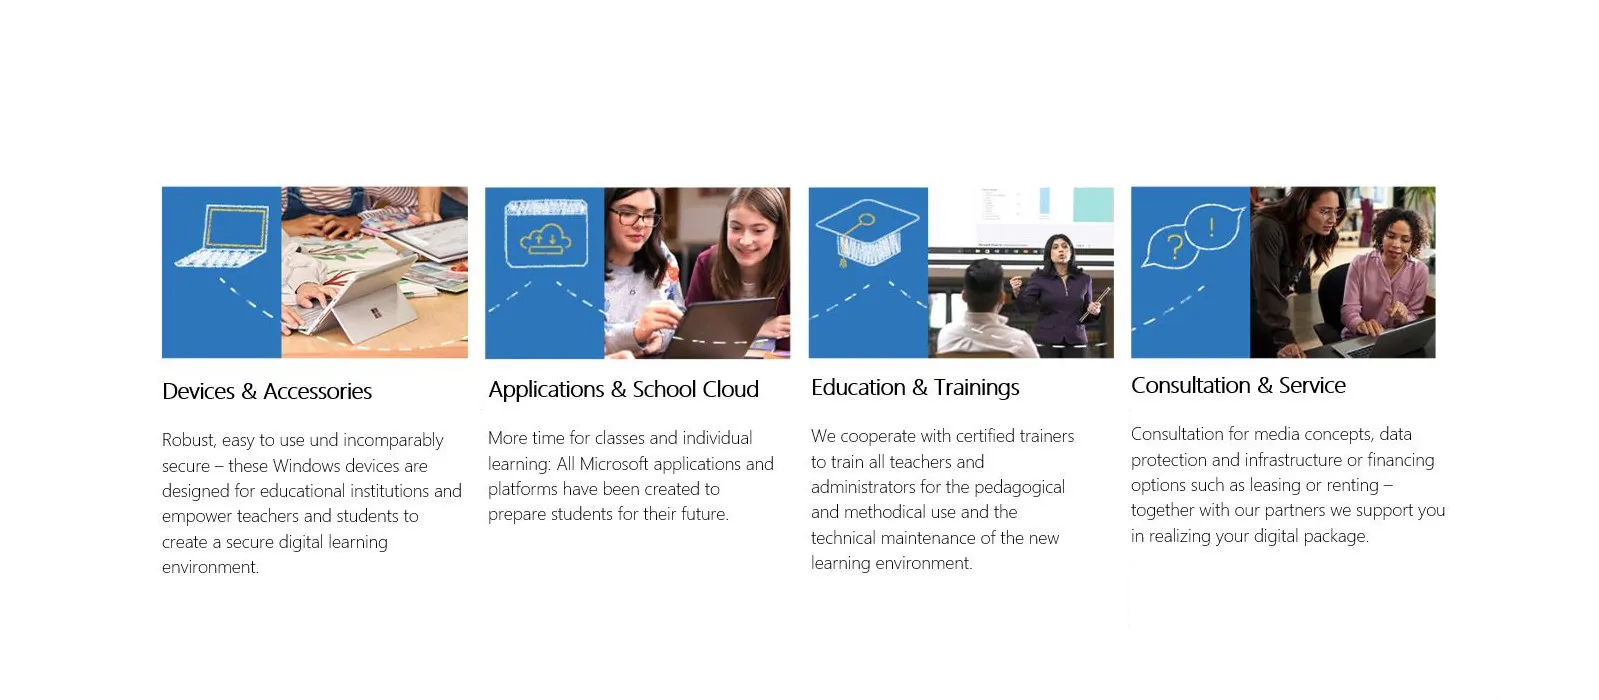 The four components of the Microsoft digital program for schools